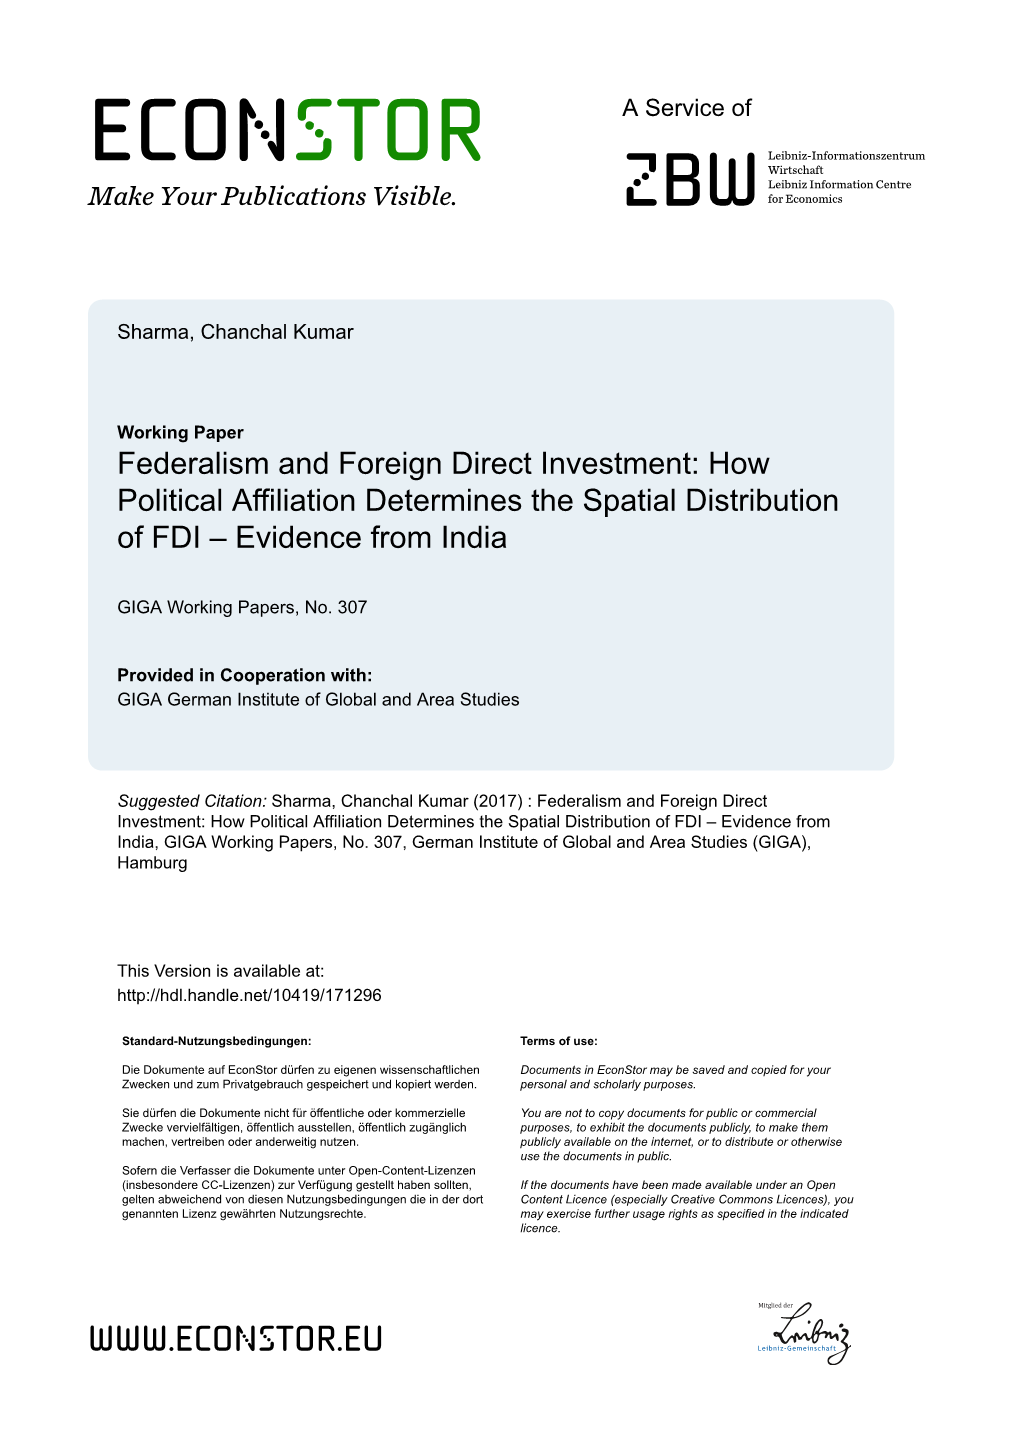 Federalism and Foreign Direct Investment: How Political Affiliation Determines the Spatial Distribution of FDI – Evidence from India